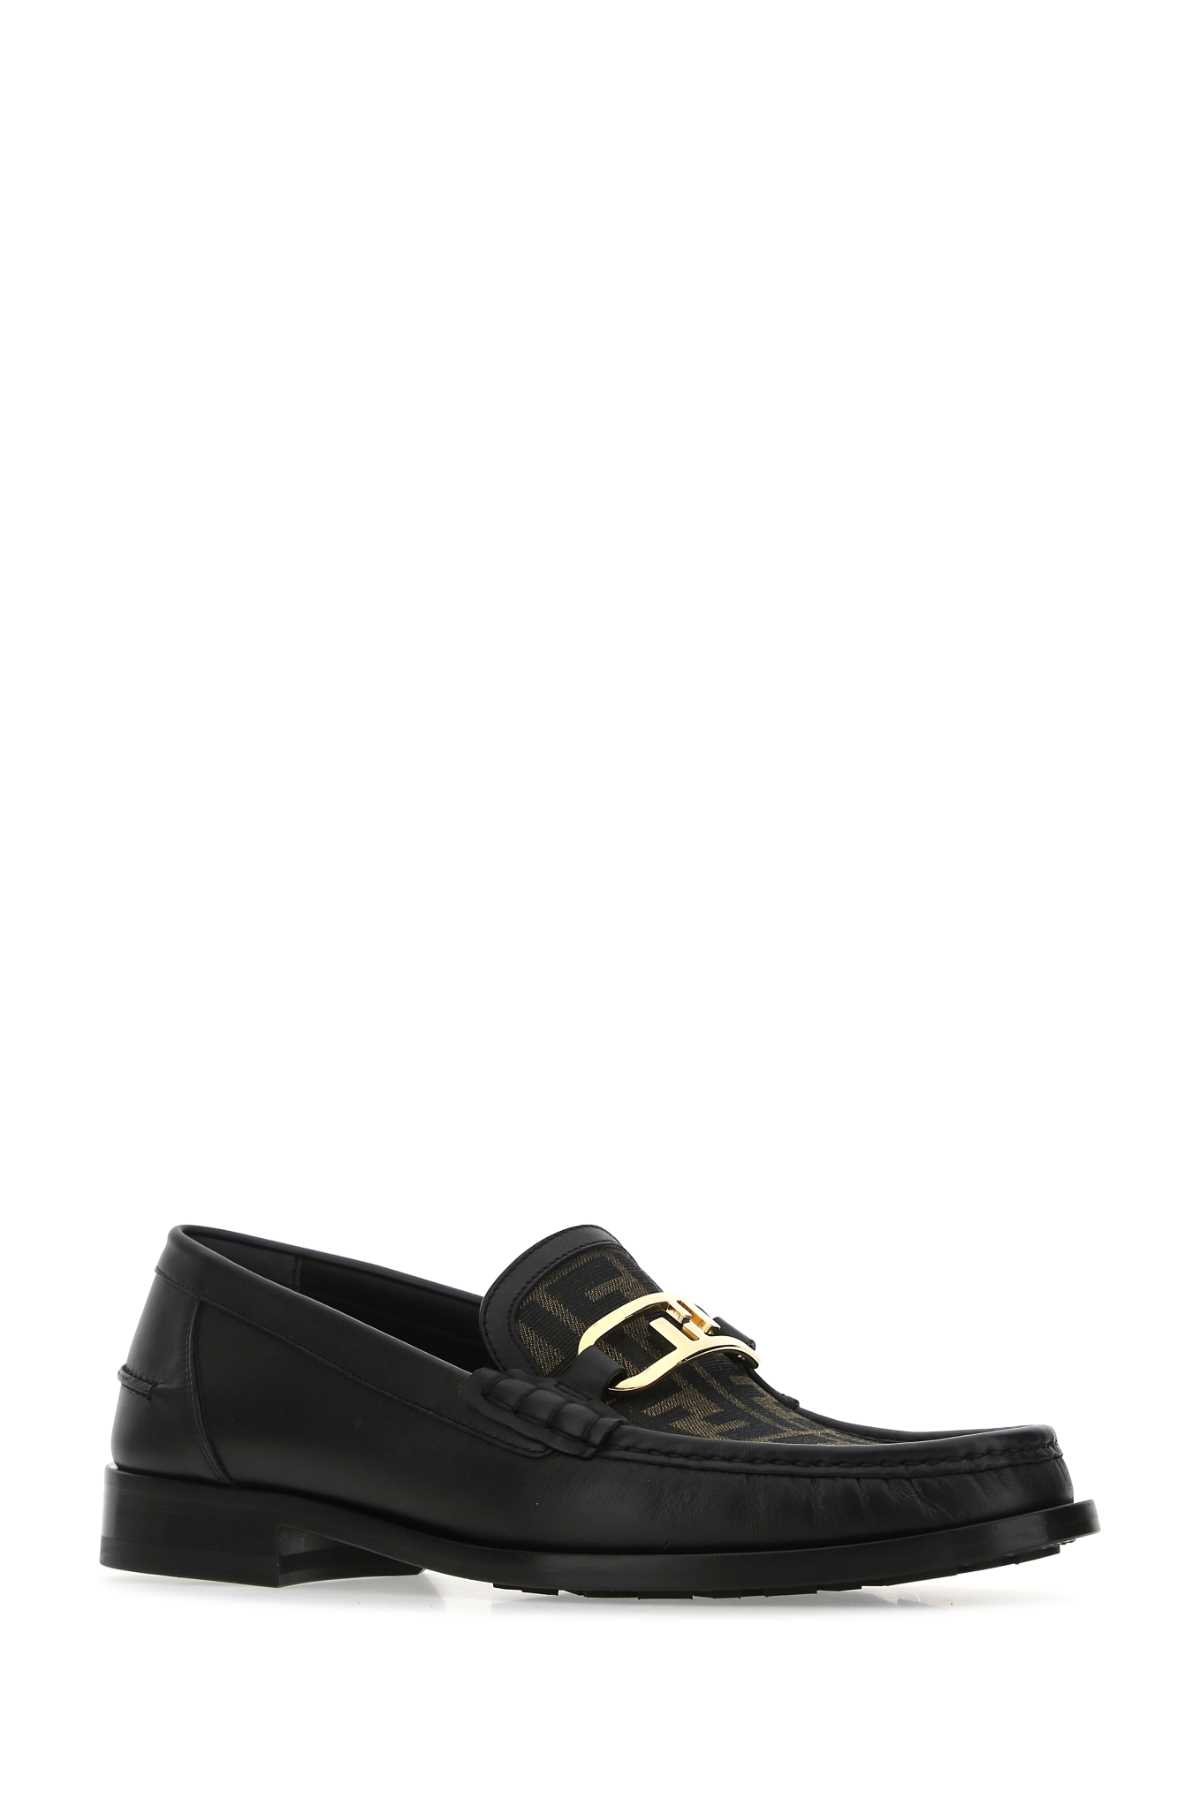 FENDI MULTICOLOR LEATHER AND FABRIC LOAFERS